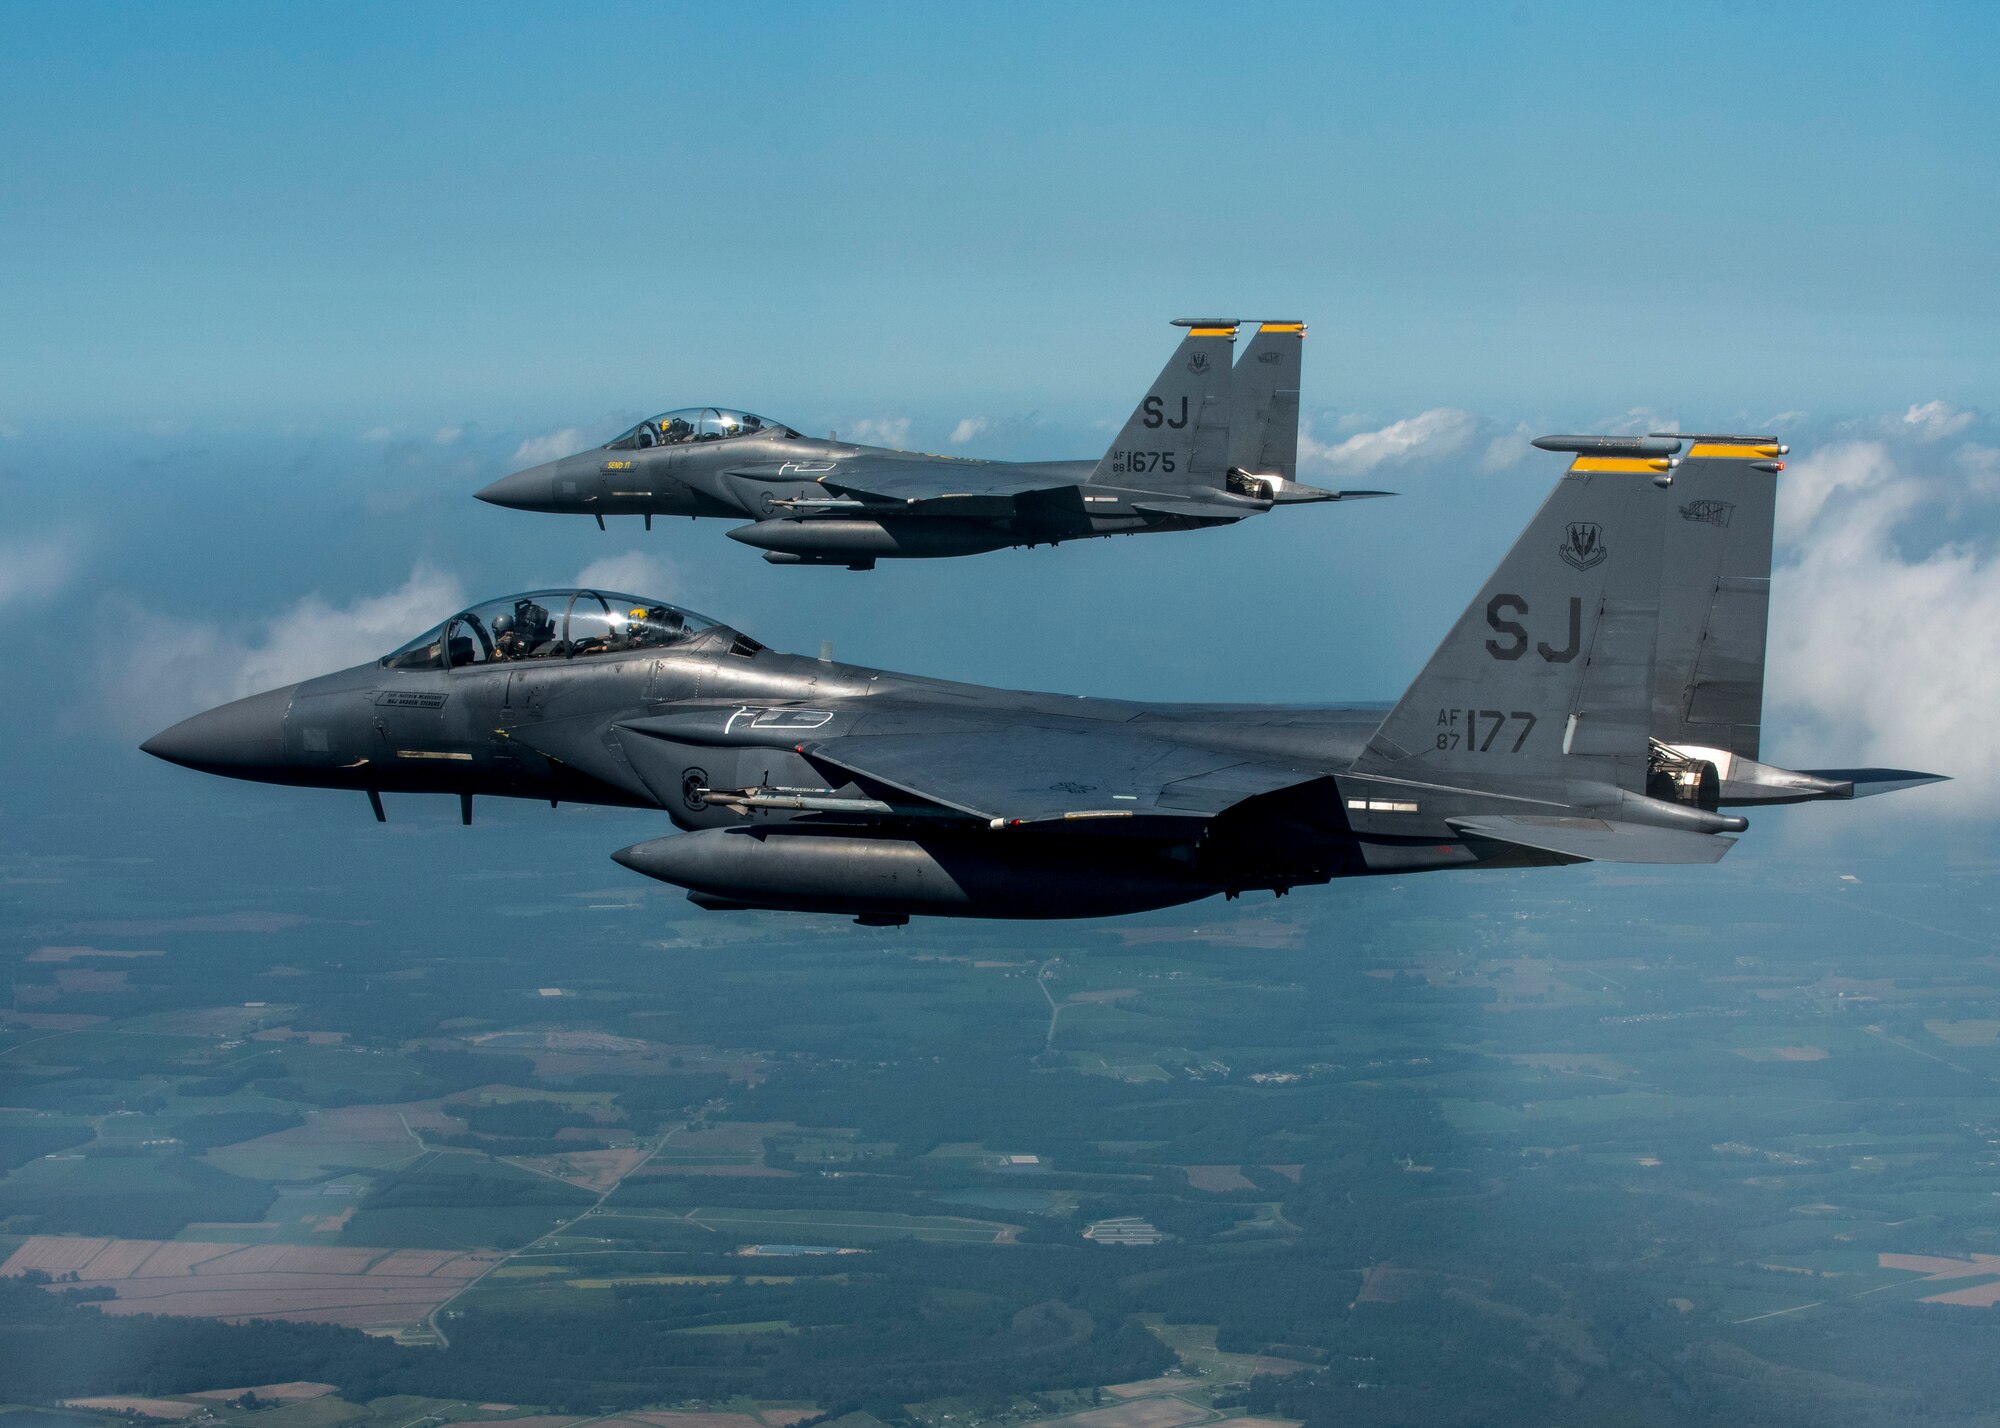 F-15E Strike Eagles from the 336th Fighter Squadron at Seymour Johnson Air Force Base fly in the sky over North Carolina.